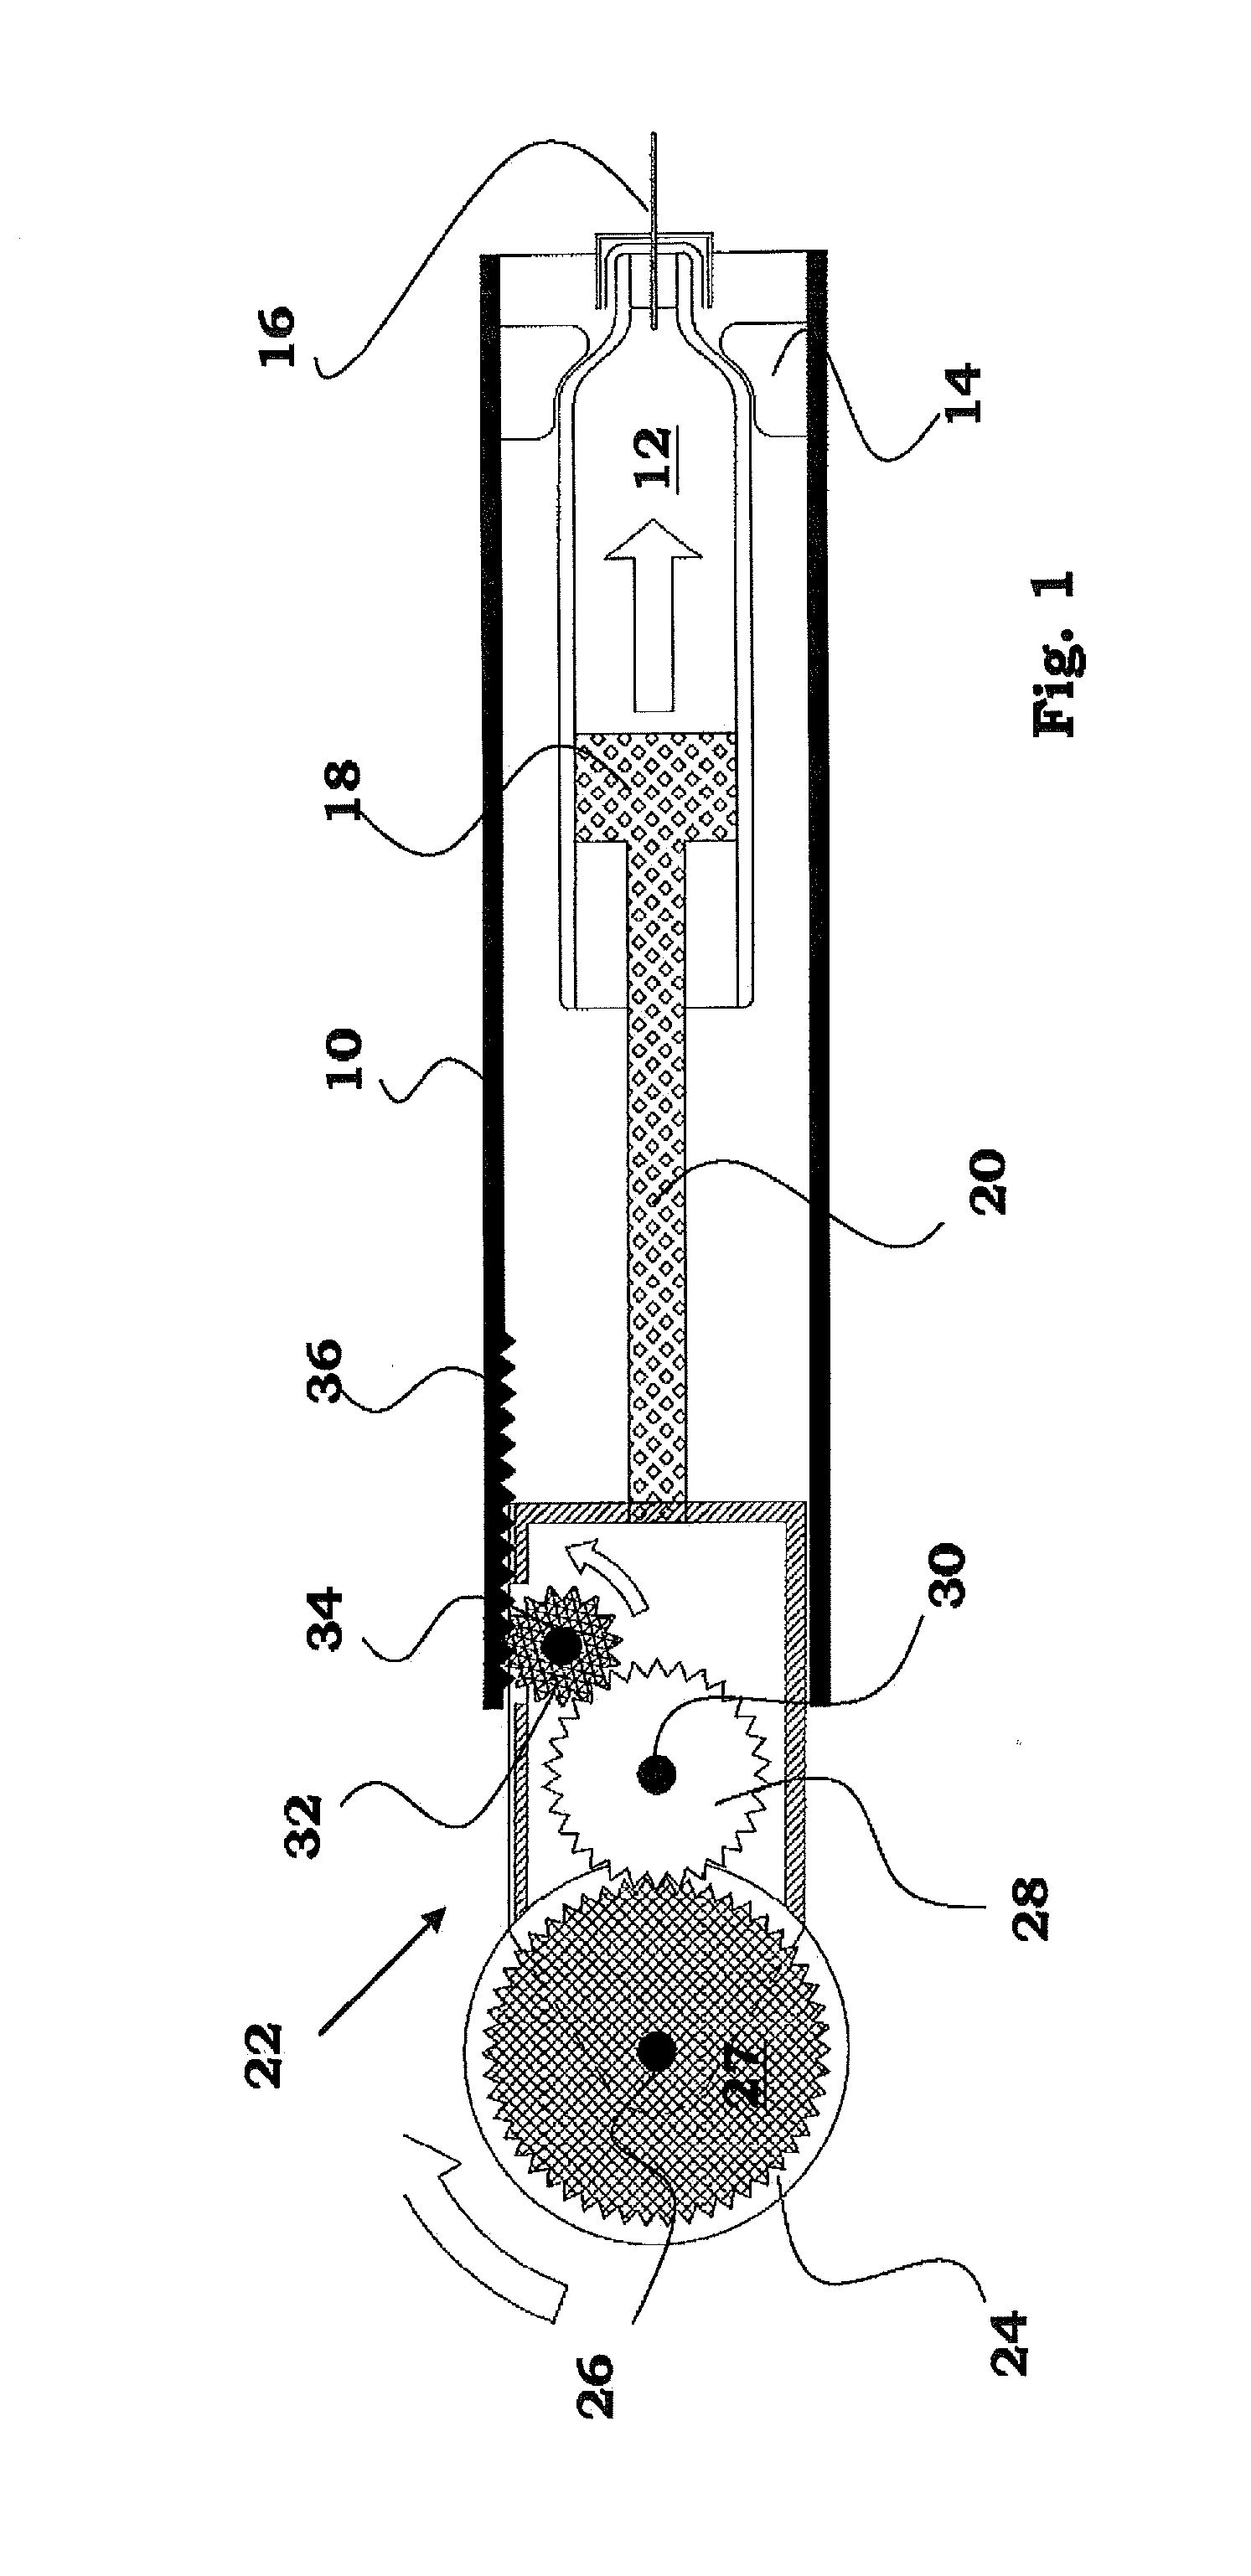 Injector with Thumb Operable Scroll Wheel